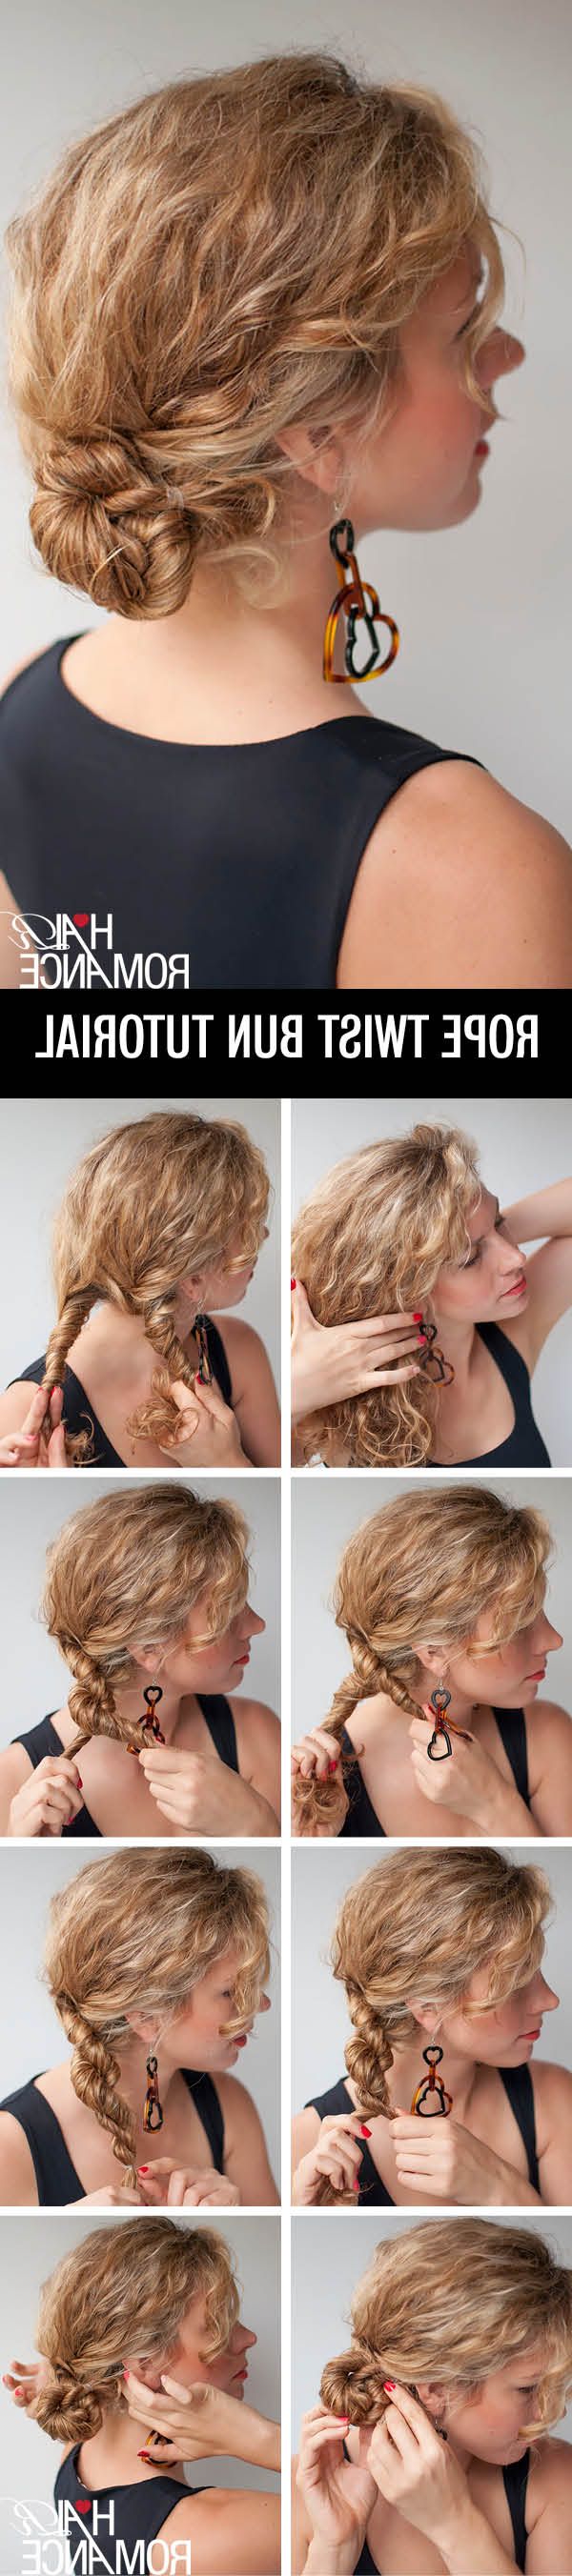 Most Popular Twisted Rope Braid Updo Hairstyles Intended For Rope Twist Bun Hairstyle Tutorial In Curly Hair – Hair Romance (View 13 of 20)